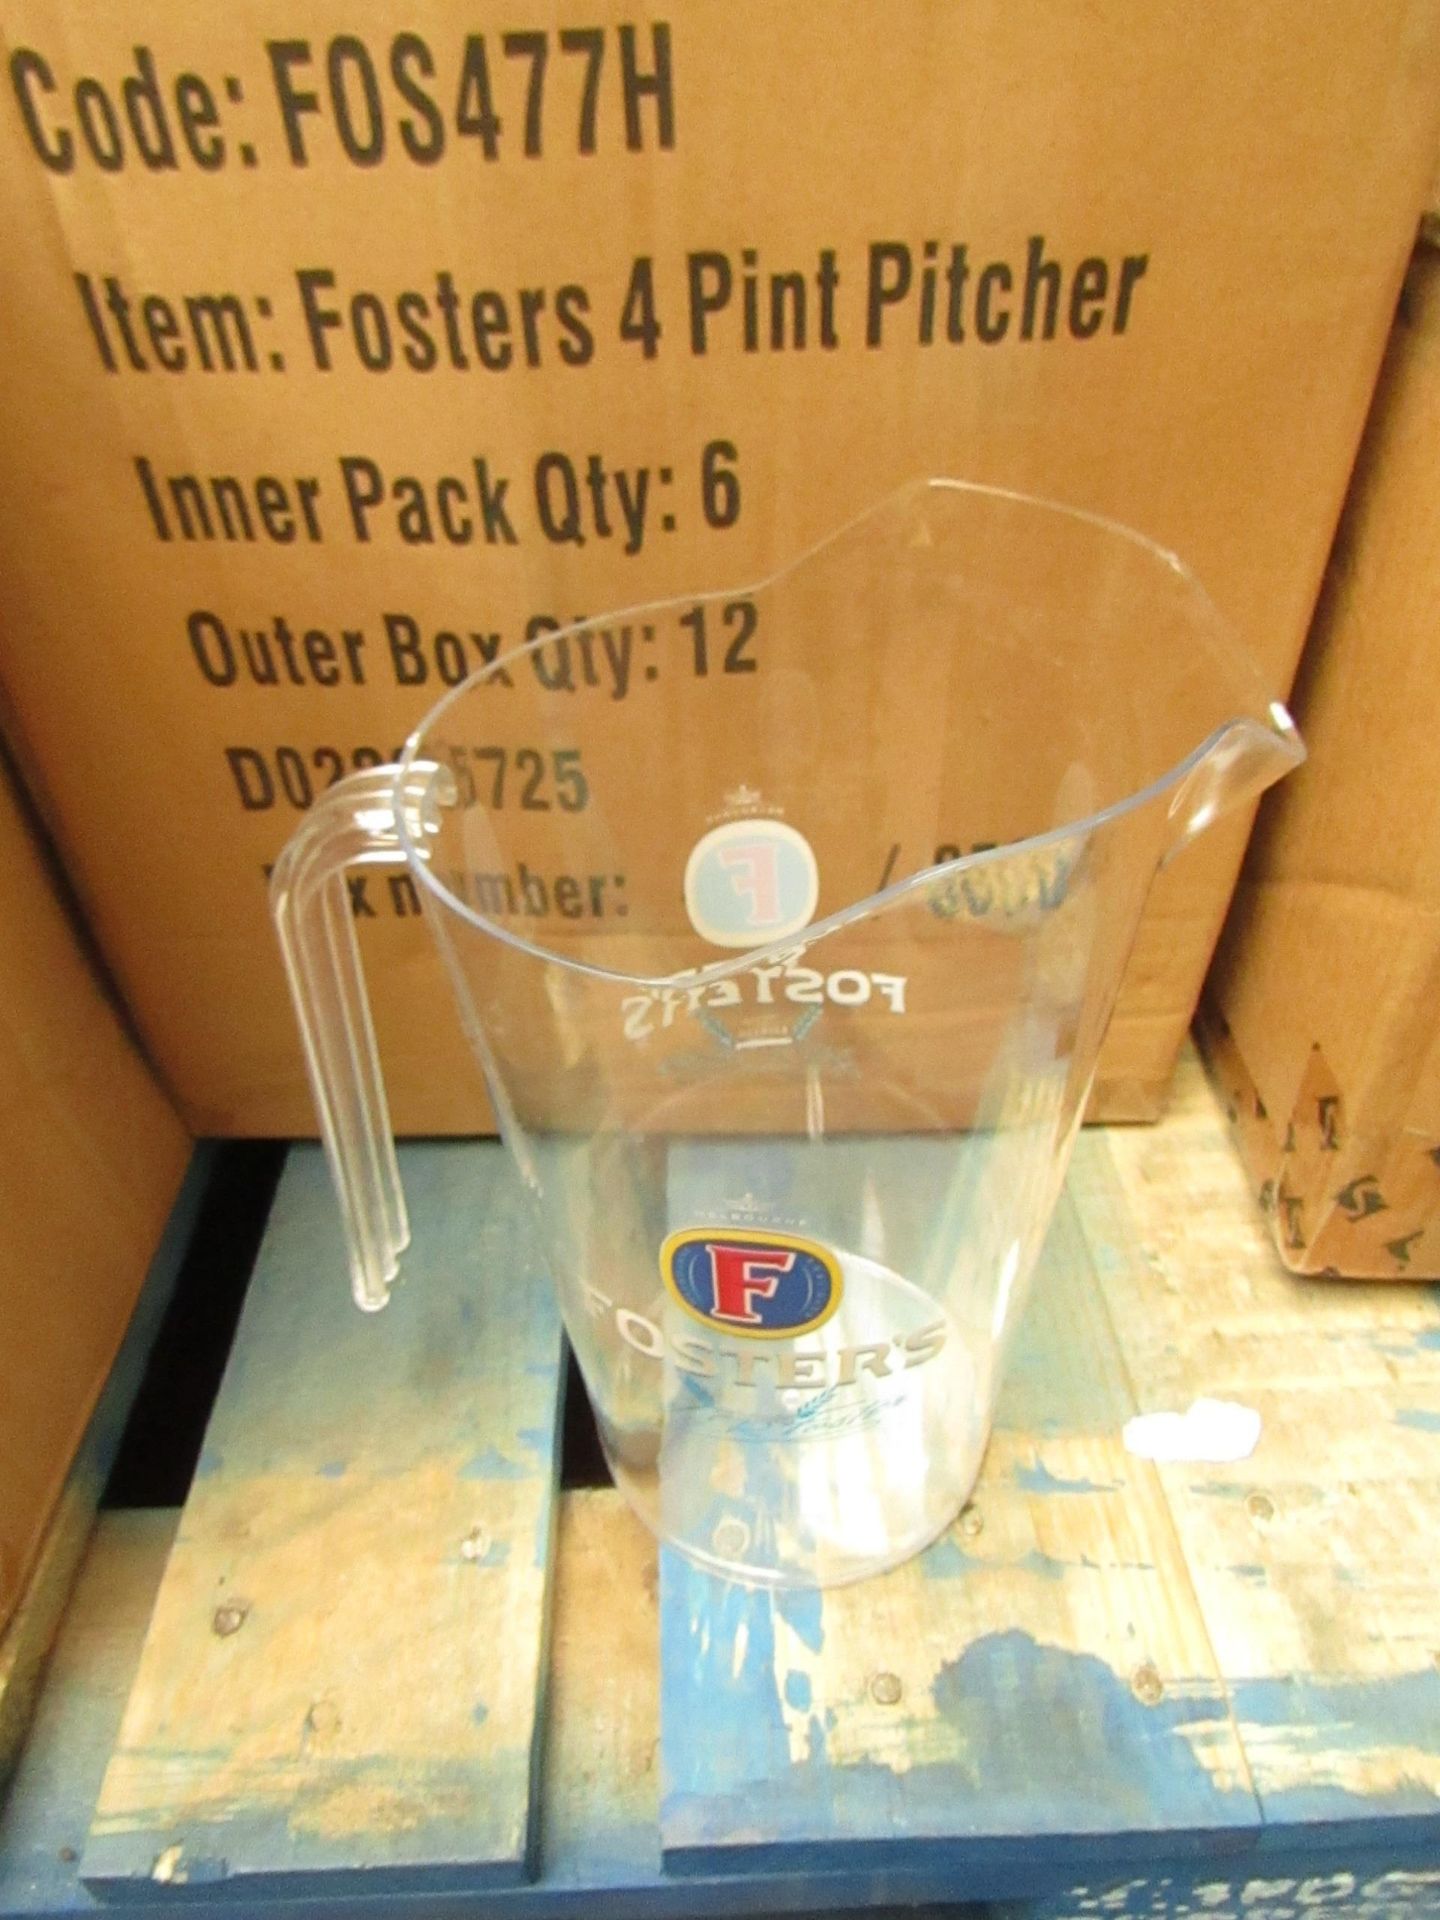 Box of 12x Foster's - 4 Pint Pitcher Jug - All Packaged and Boxed.